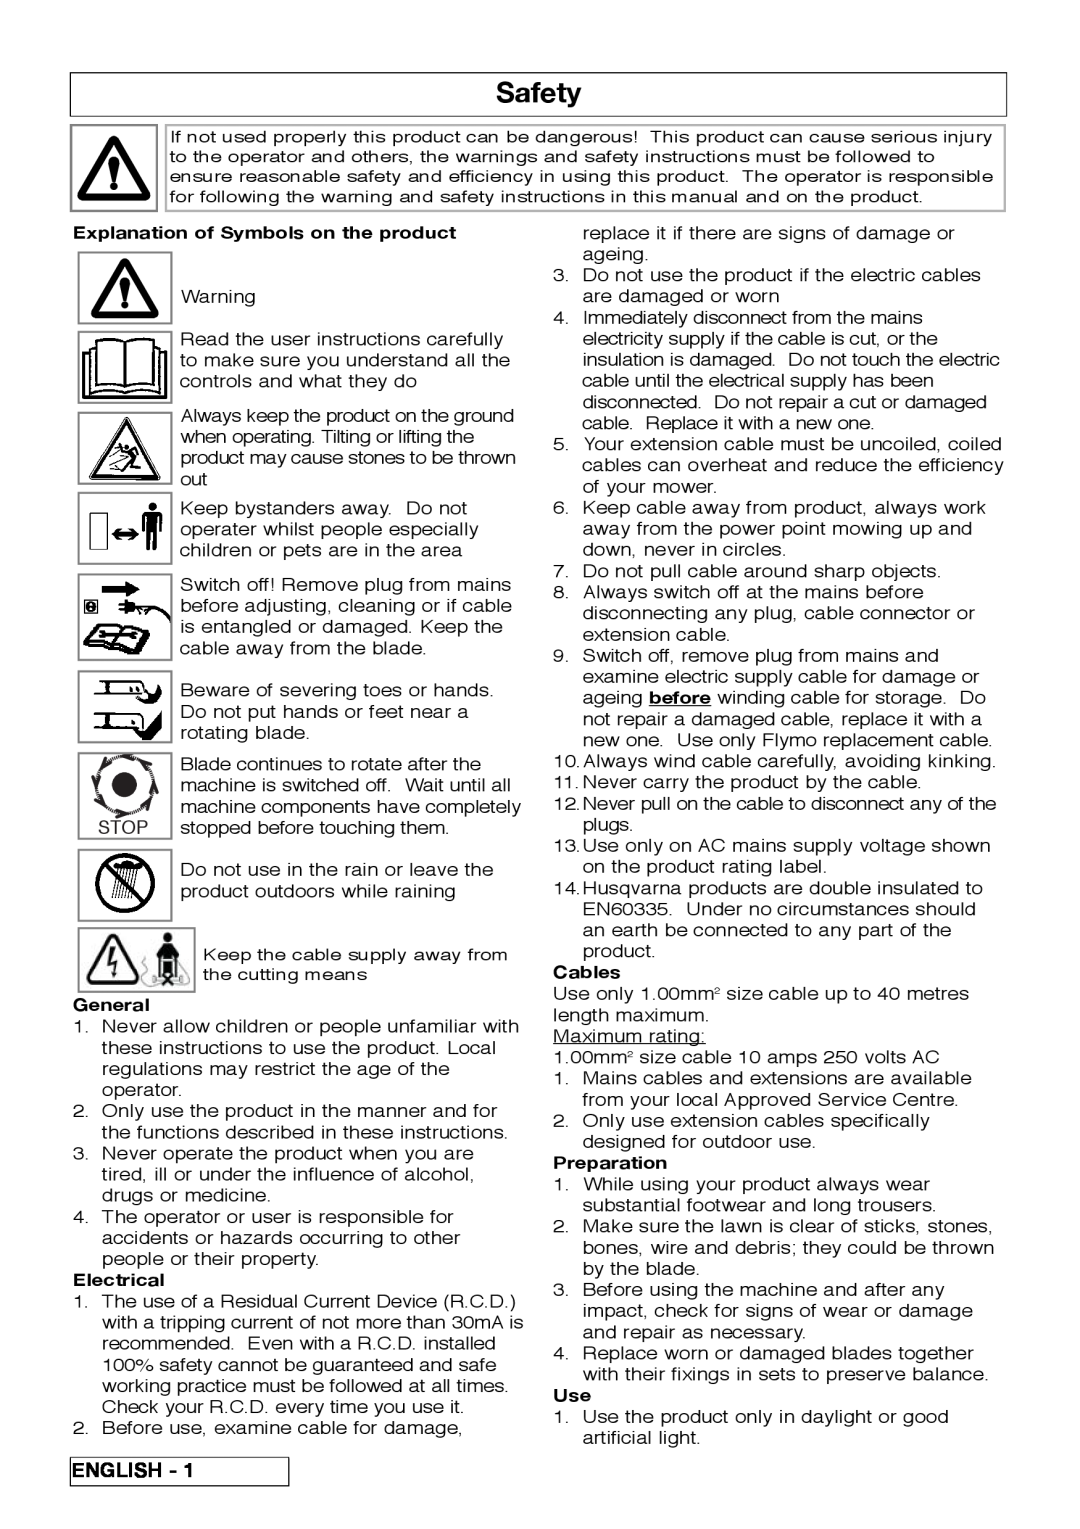 Flymo VM032 manual Safety, English, Explanation of Symbols on the product, General, Electrical, Cables, Preparation 